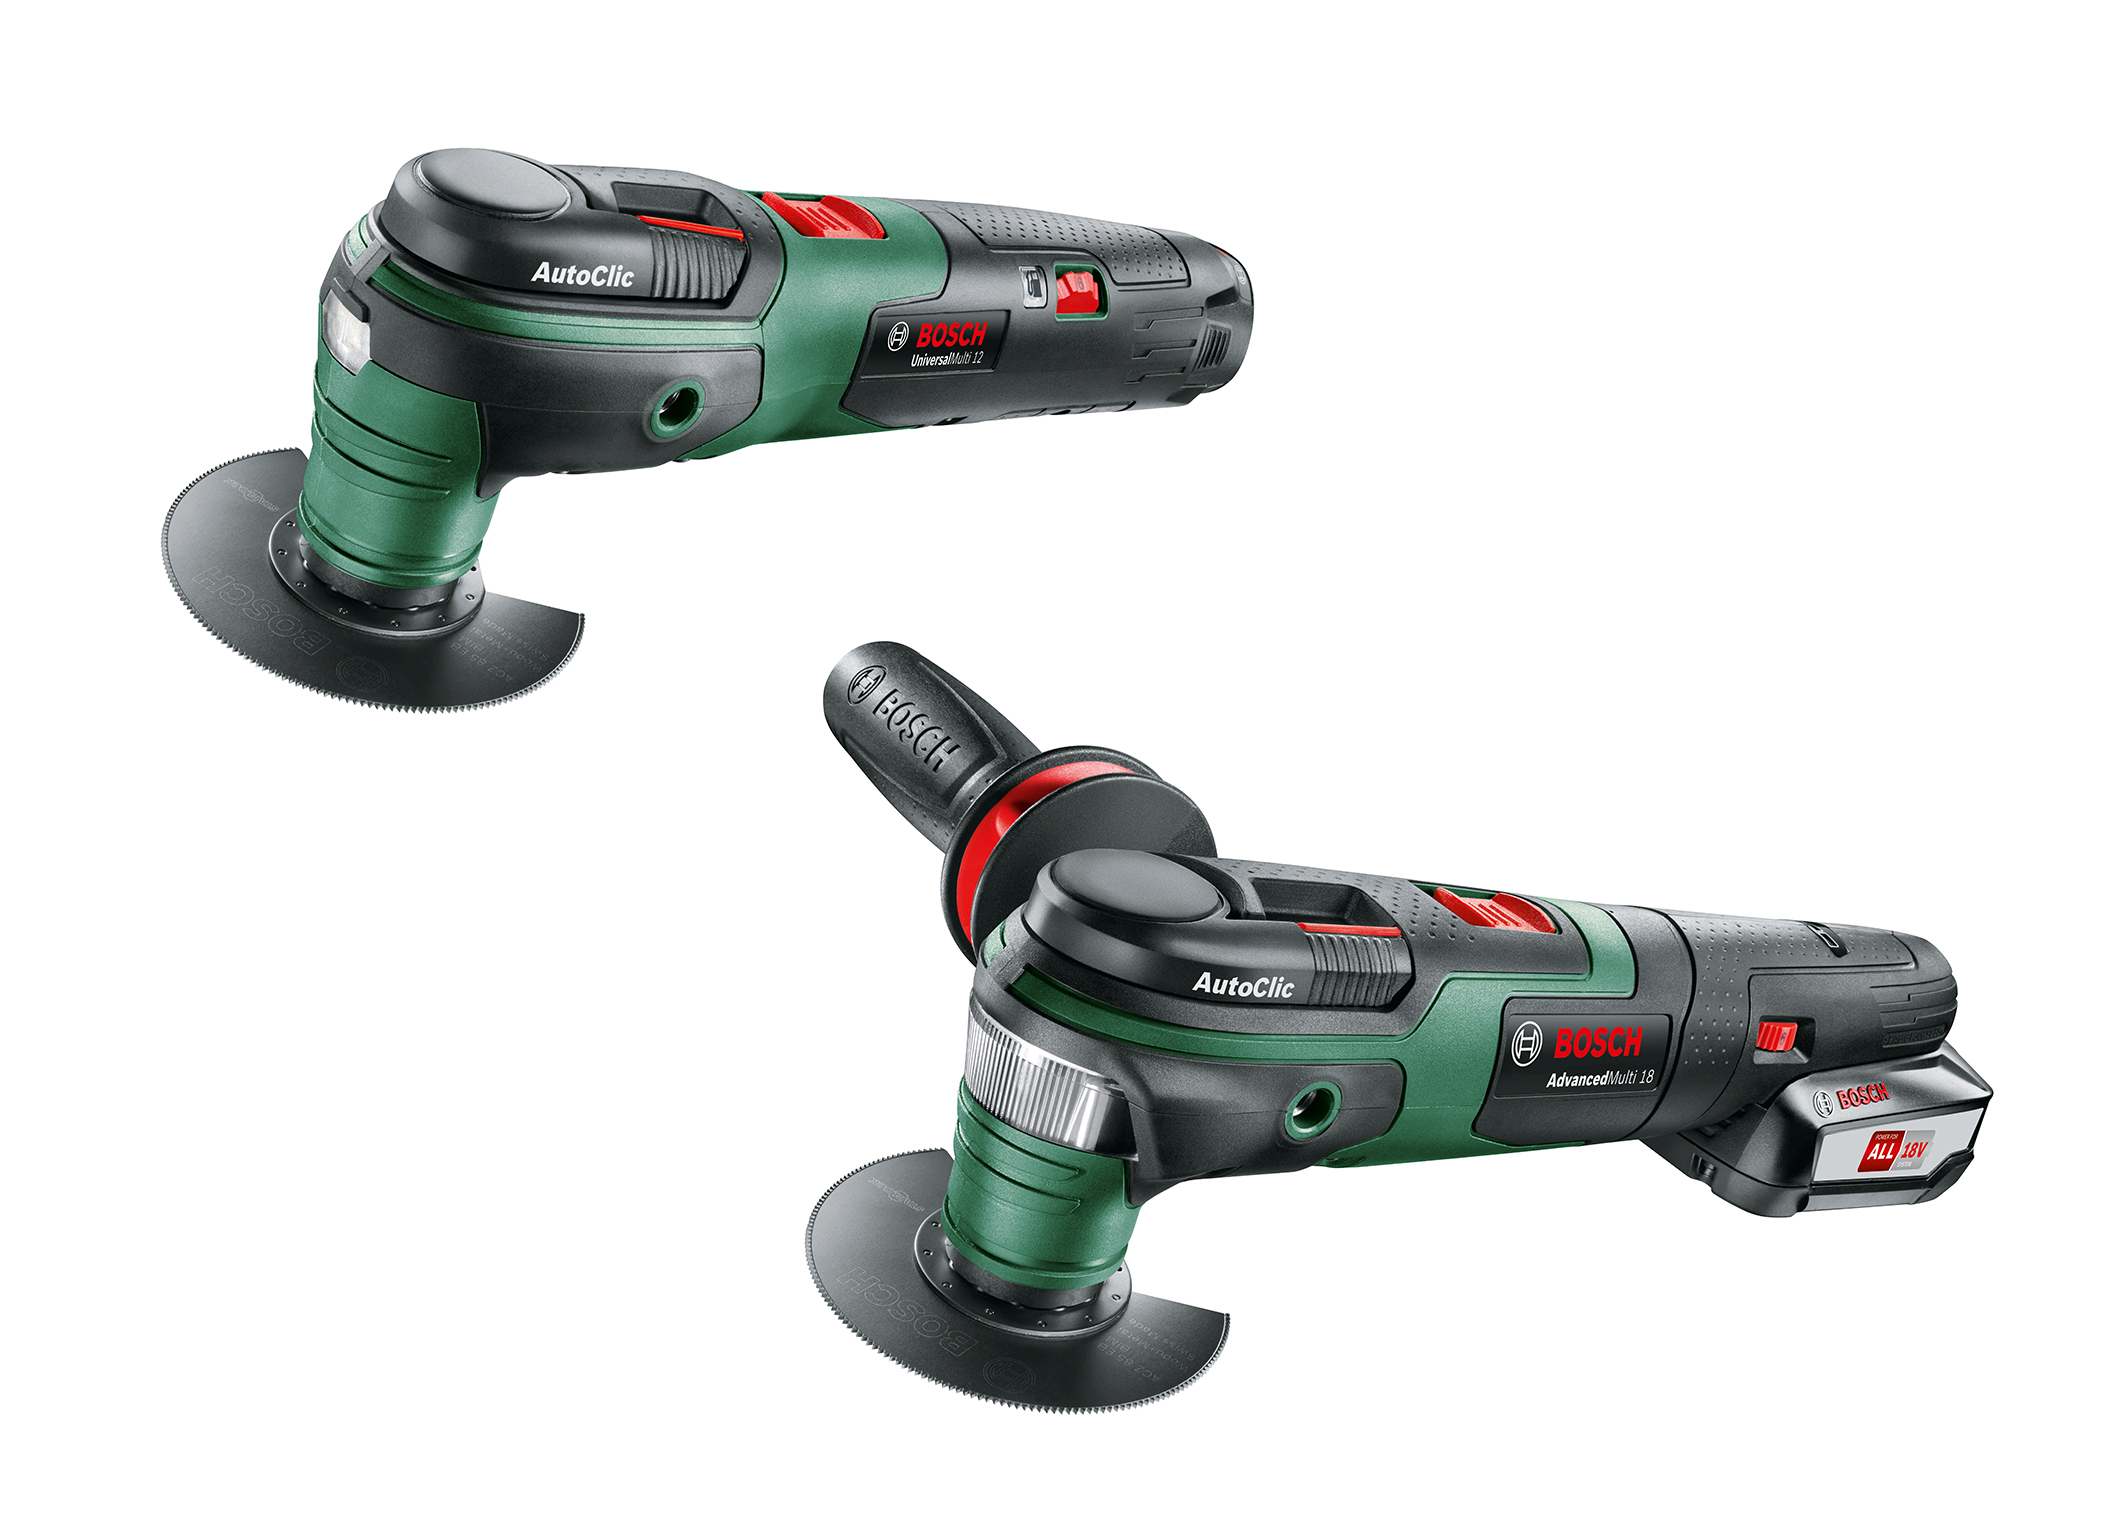 Flexible all-rounders in the 18 and 12 volt classes: Bosch cordless multifunction tools for DIYers 